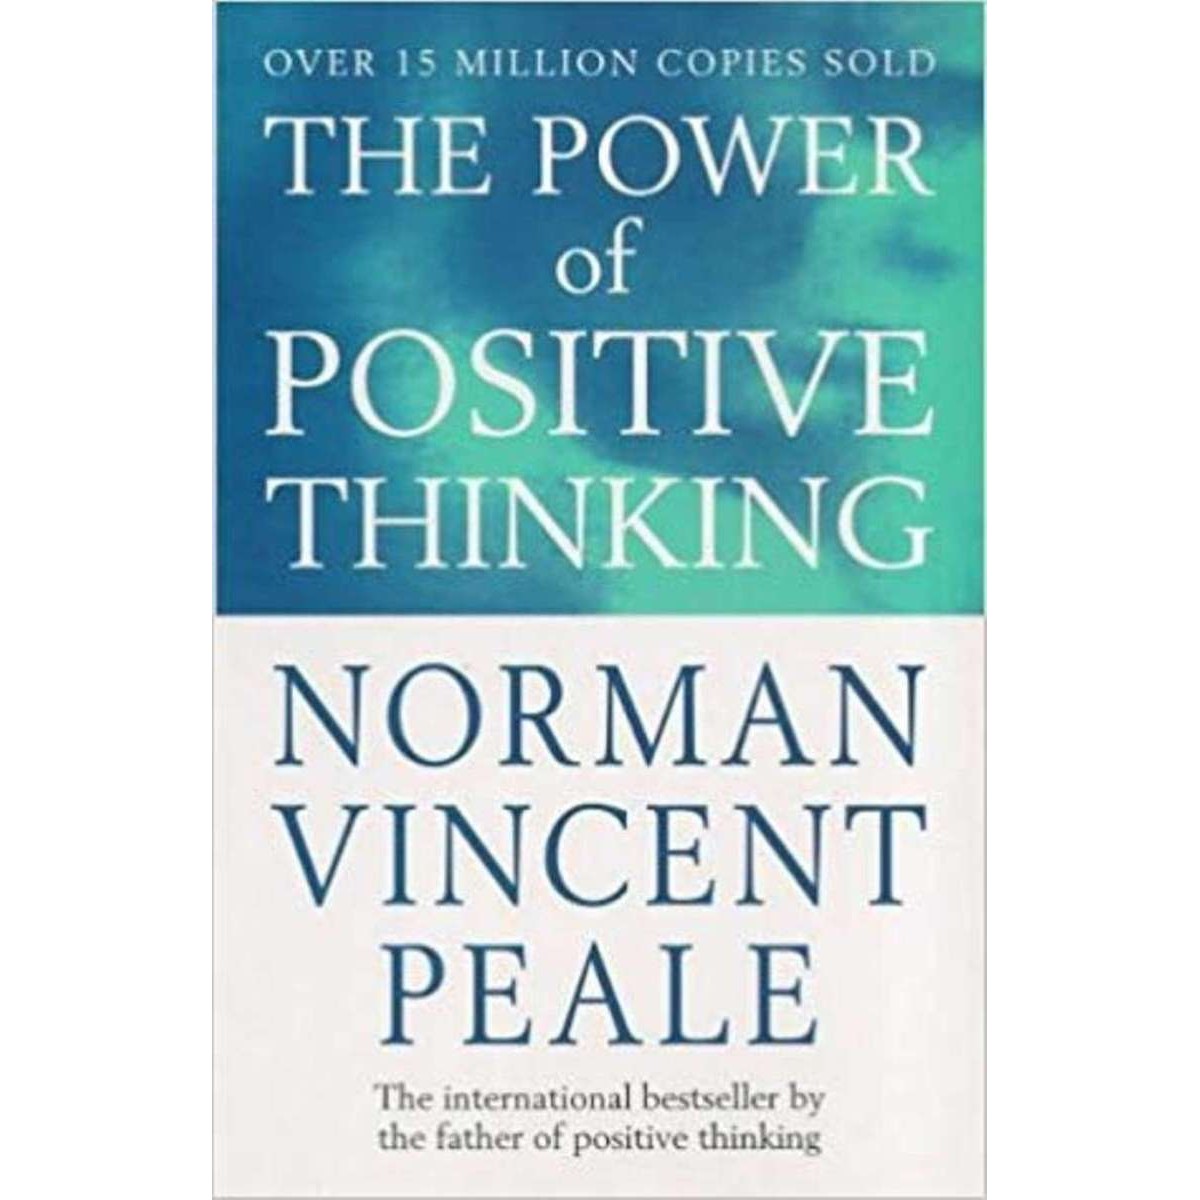 The Power of Positive Thinking (book)